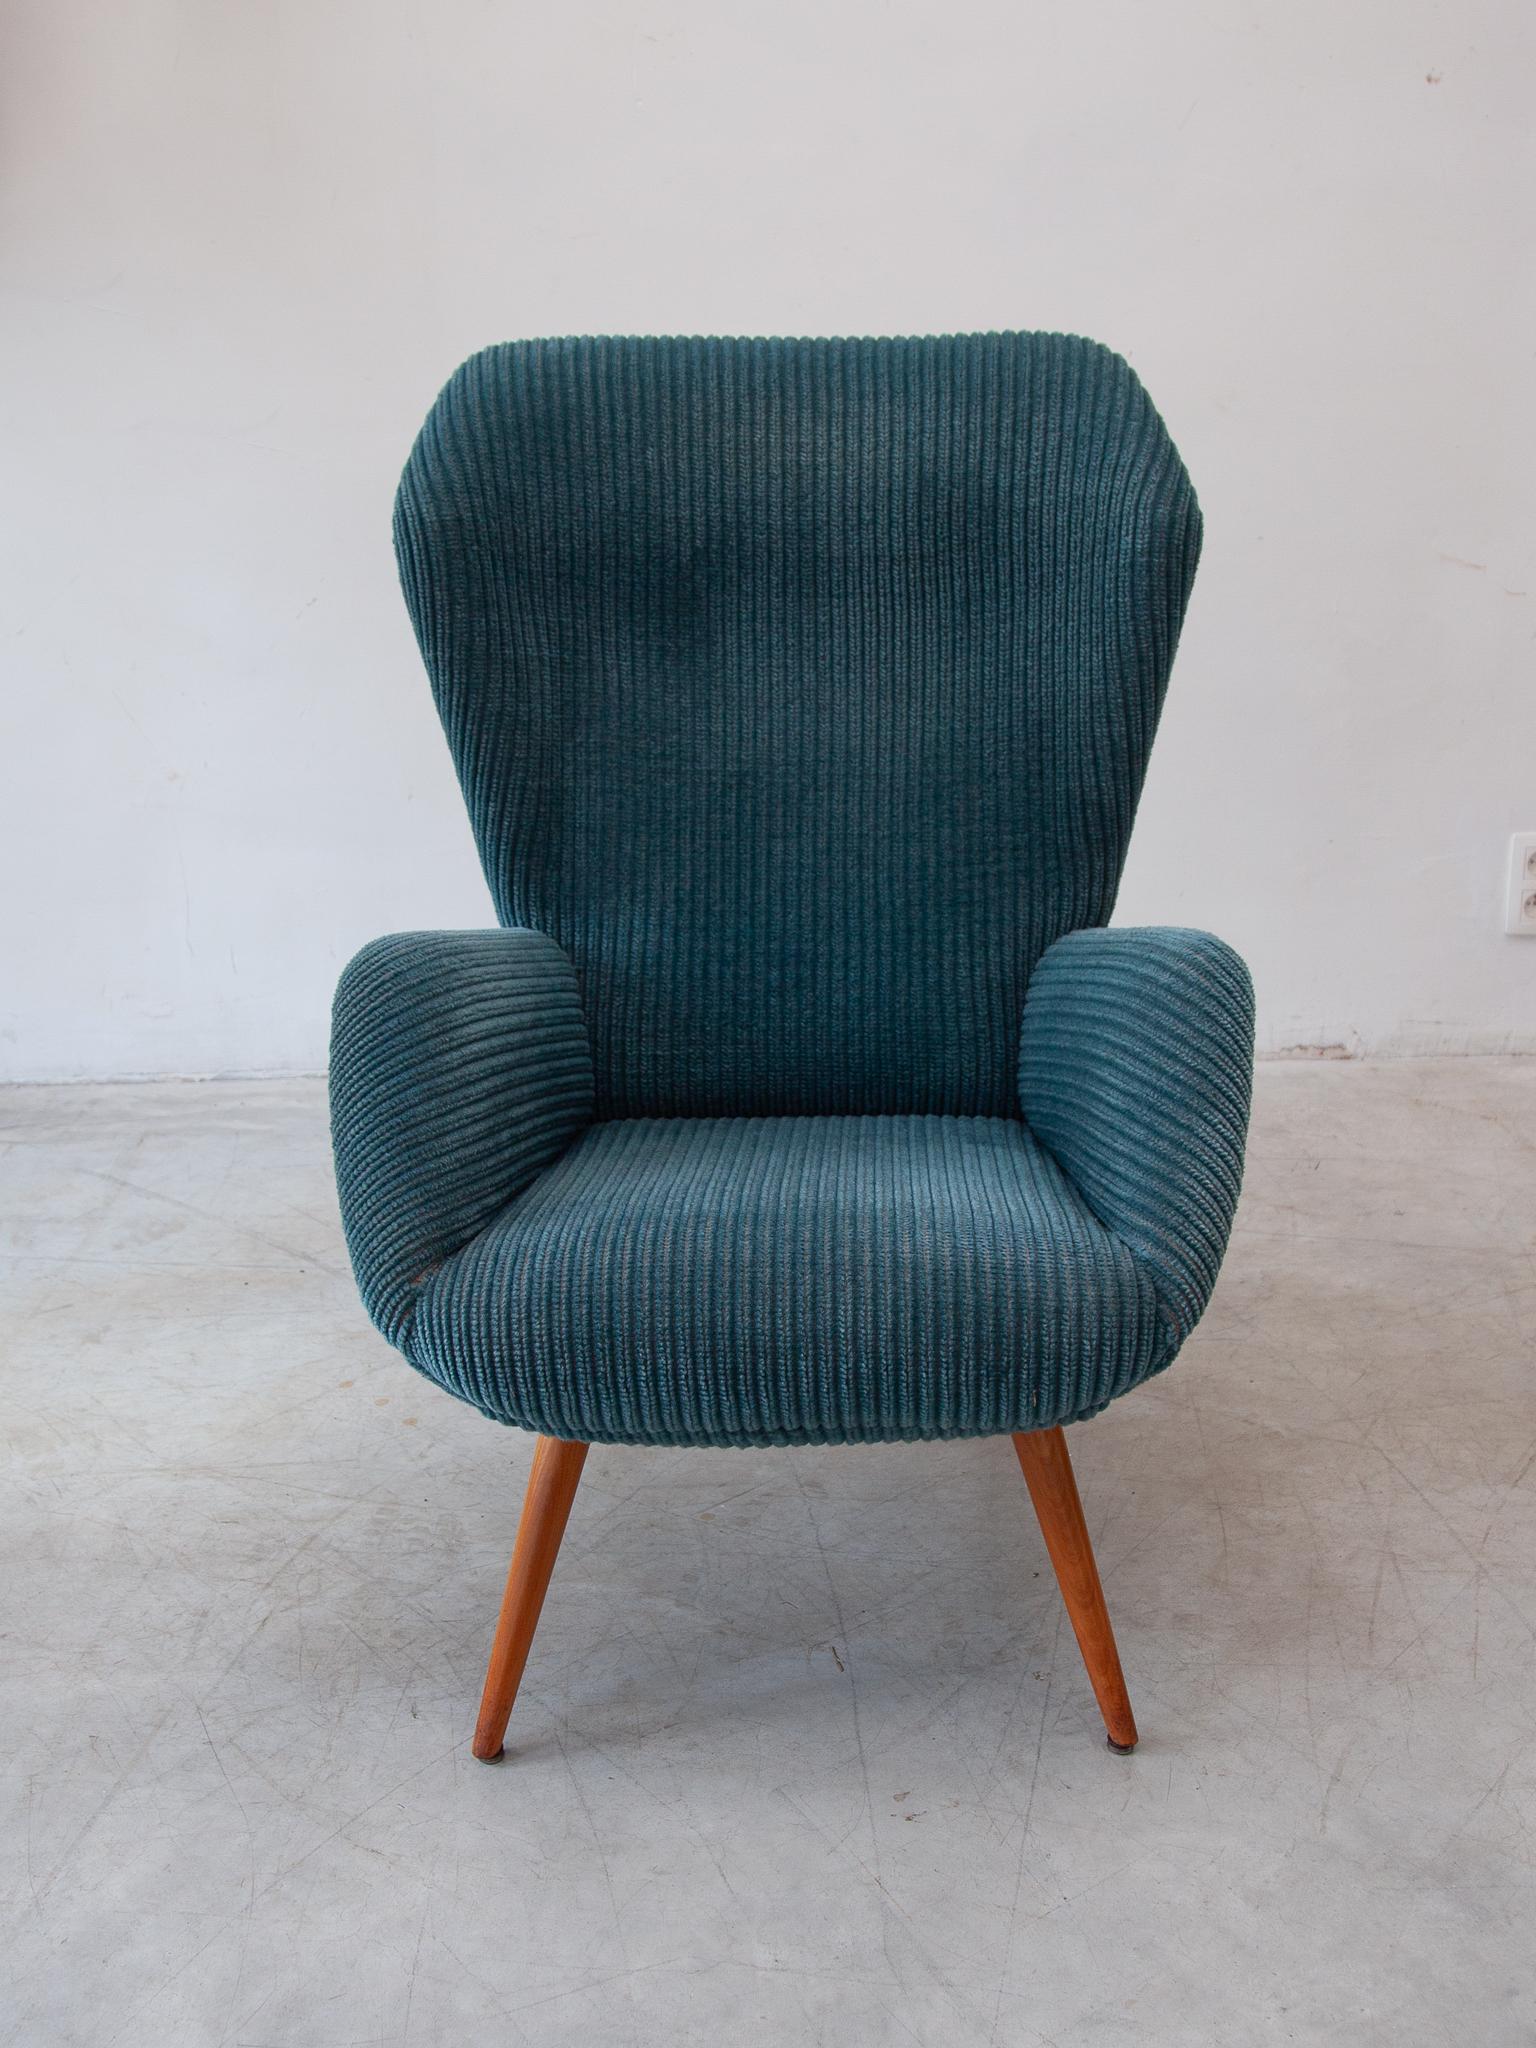 Mid-Century Modern High Wingback Lounge Chair, Germany designed by Ernst Jahn, 1950s